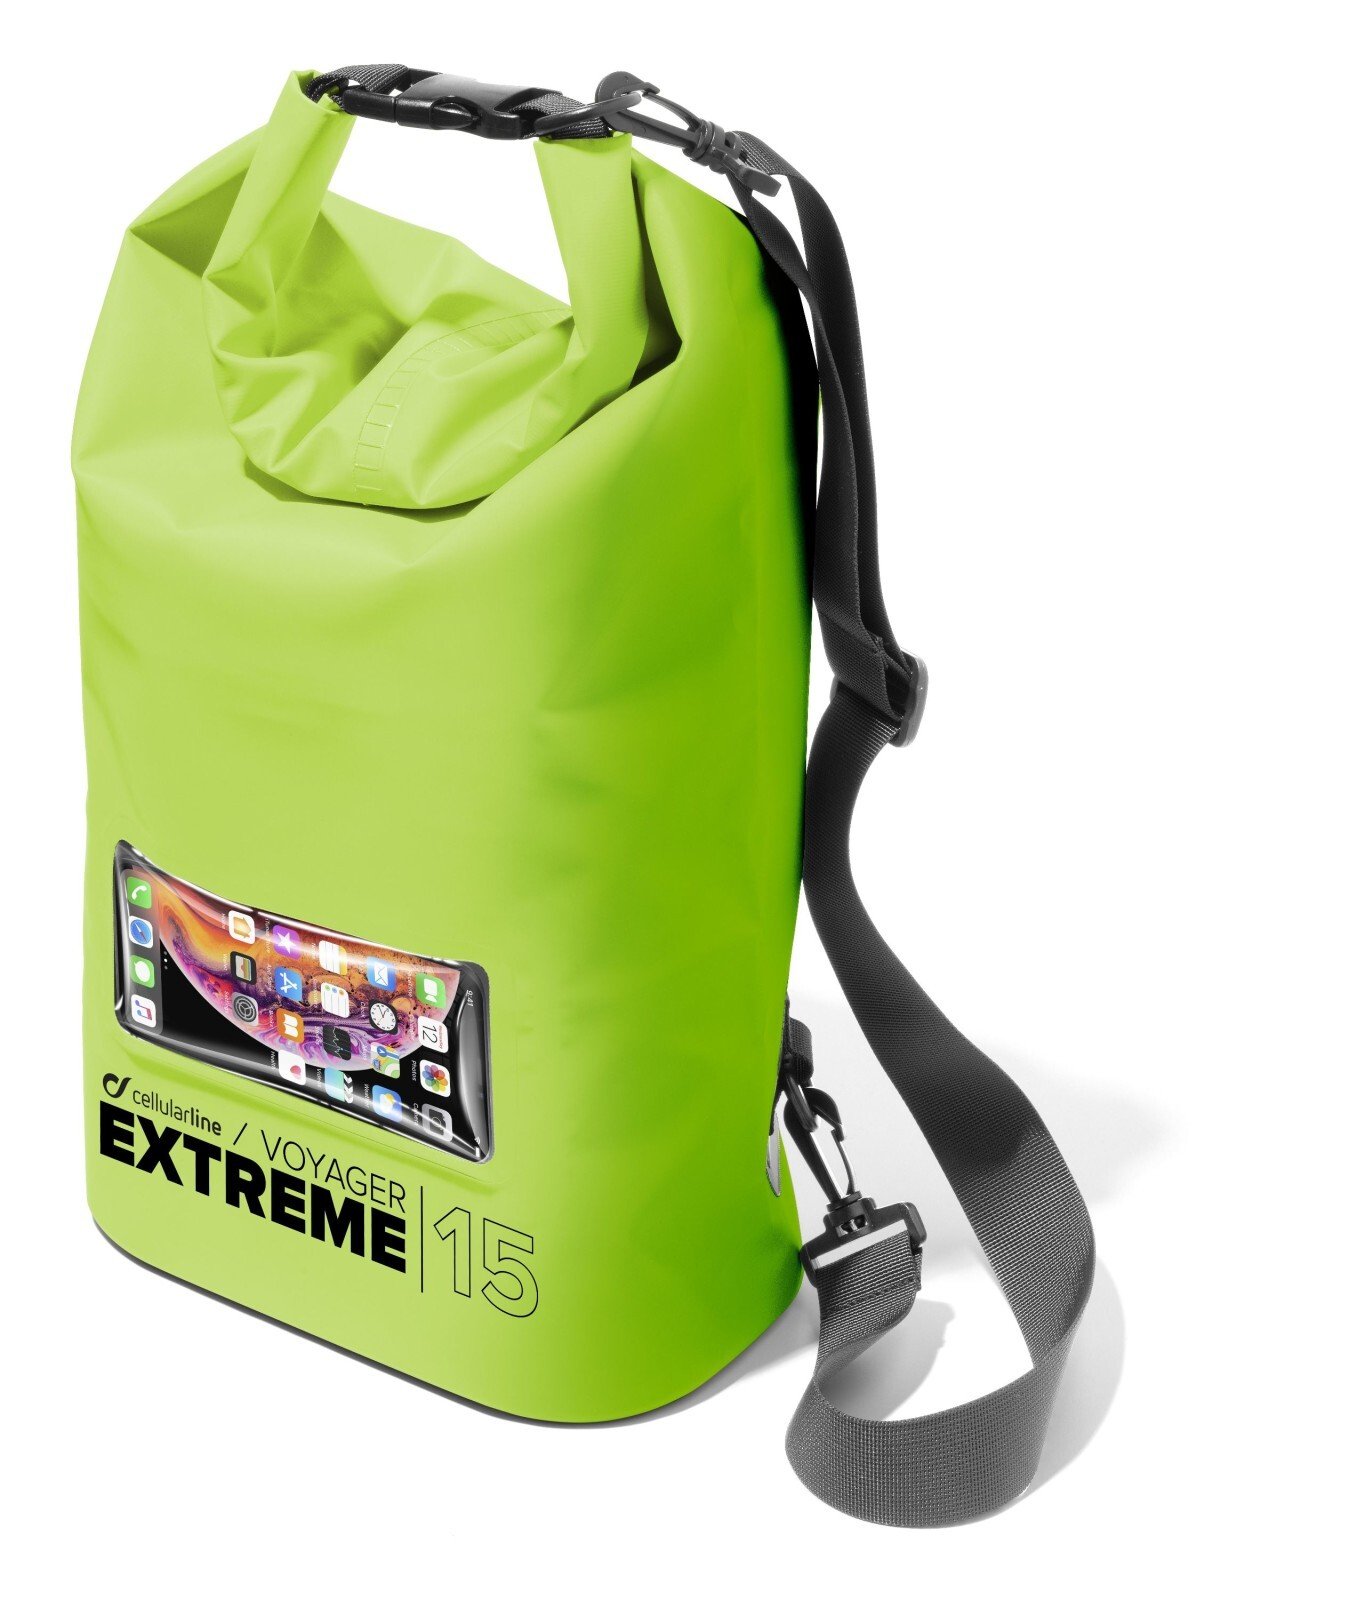 Geanta Waterproof Cellularline VOYAGER Extreme Lime thumb